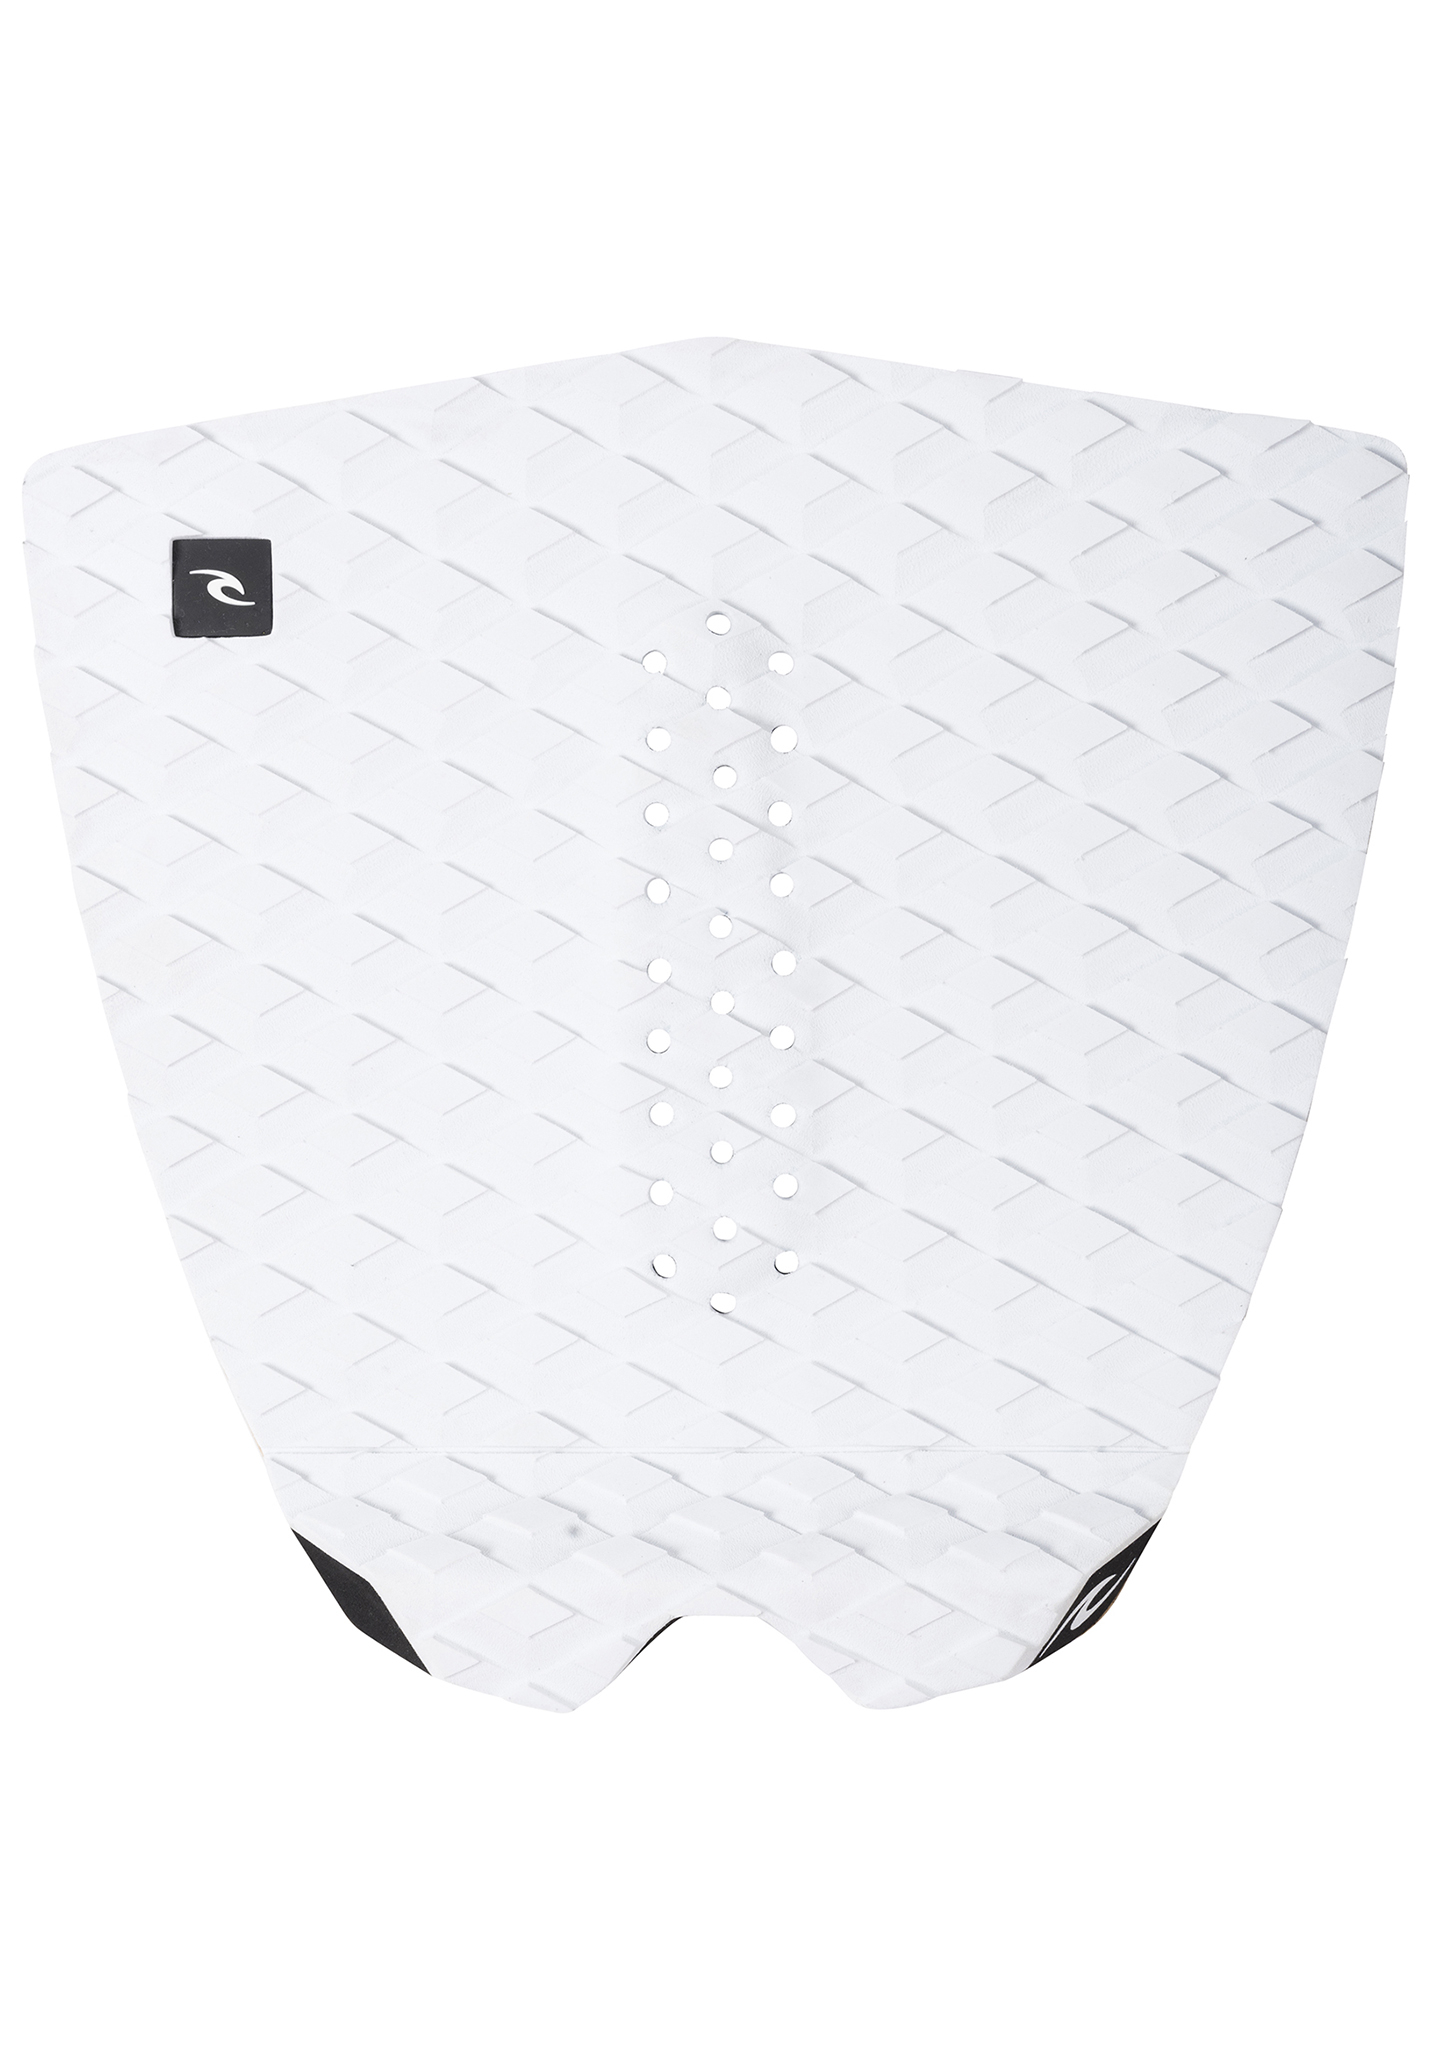 Rip Curl 1 Piece Surf Pads white One Size